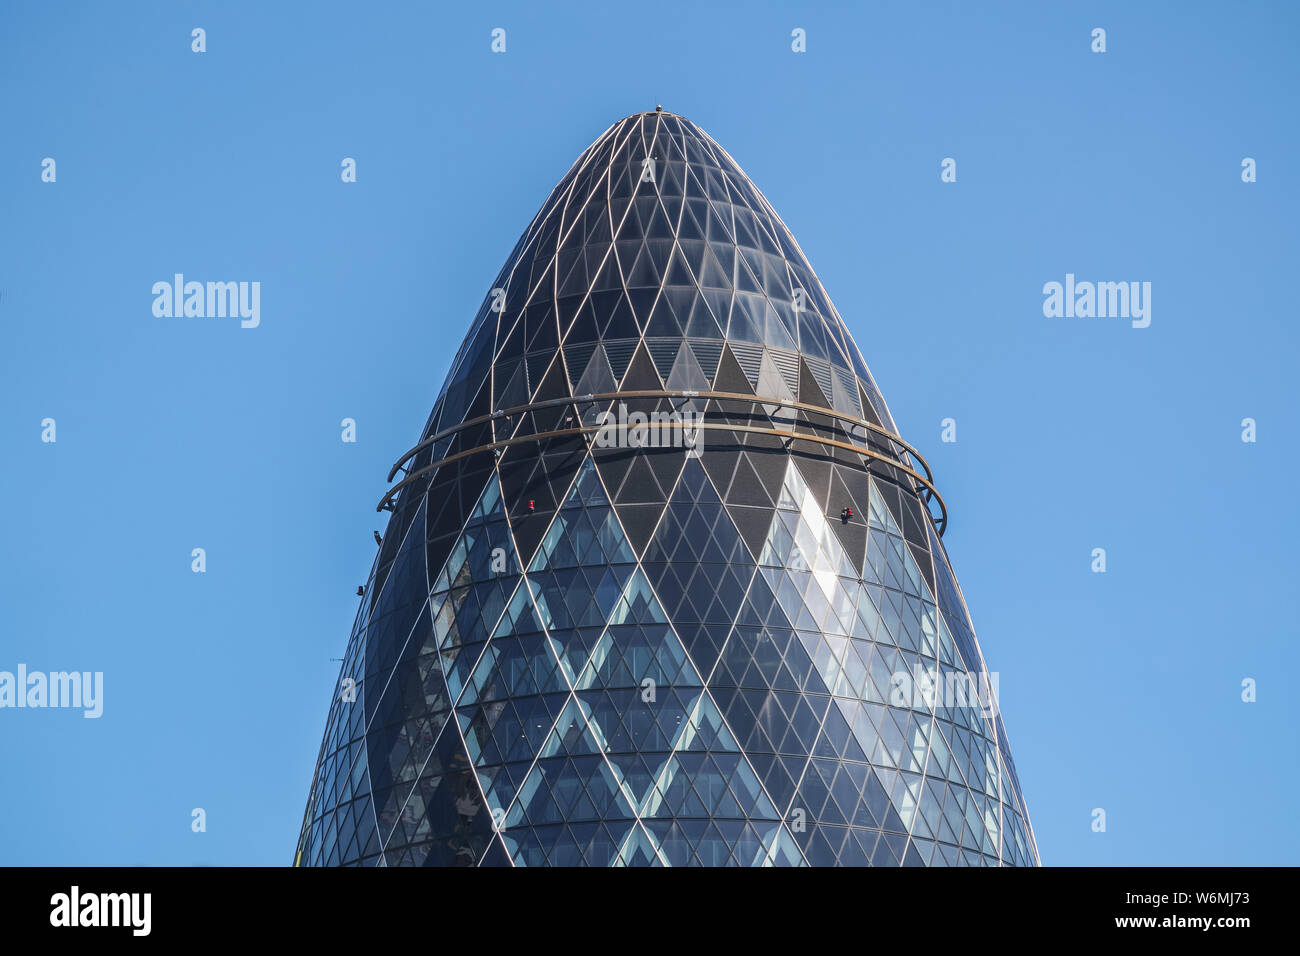 London, UK - July 16, 2019 - 30 St Mary Axe (informally known as The Gherkin and previously as the Swiss Re Building) is a commercial skyscraper Stock Photo